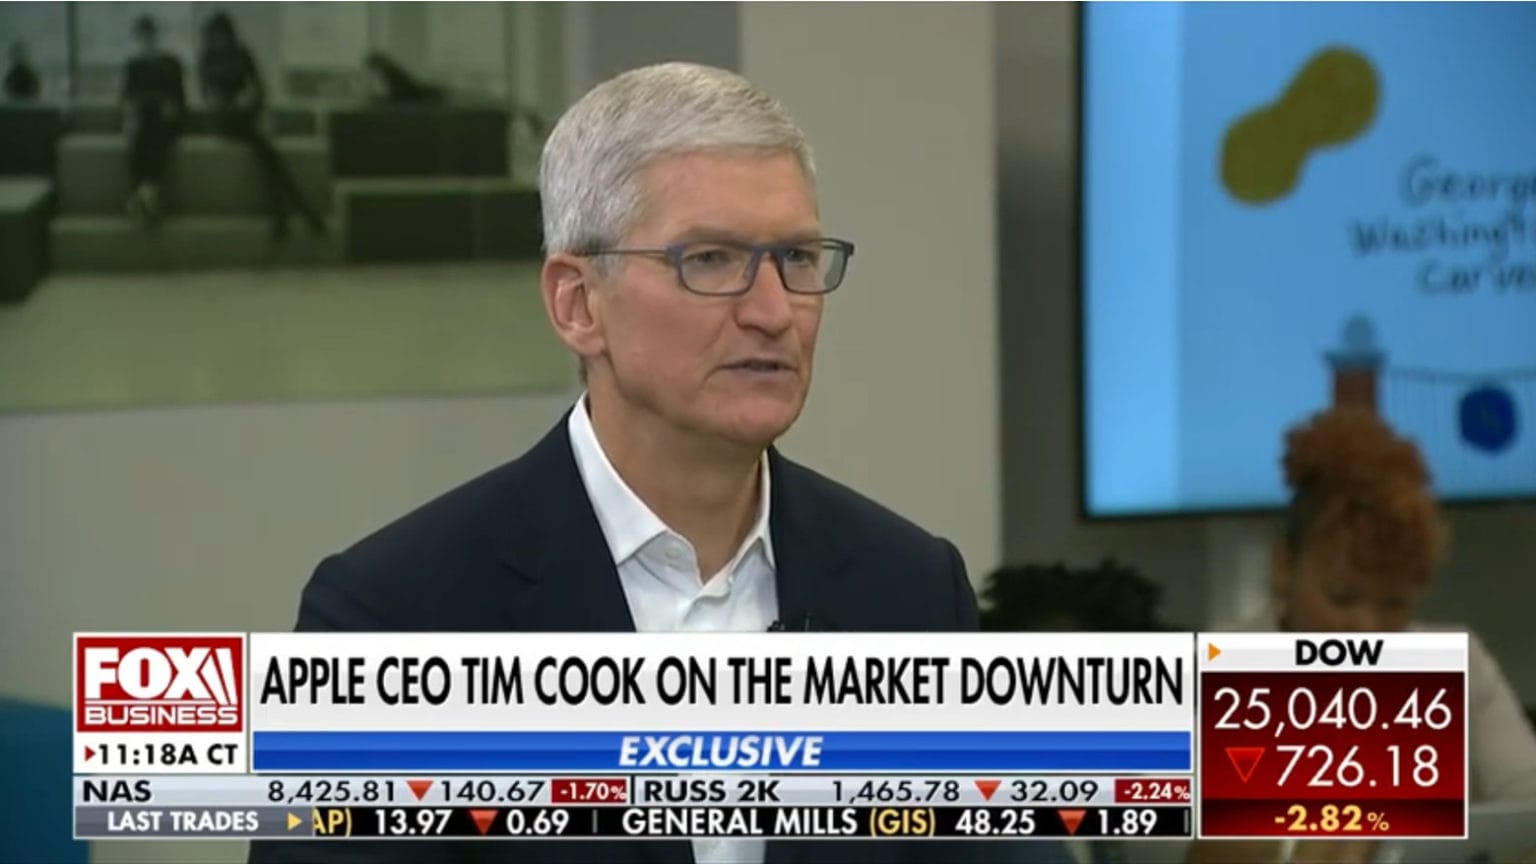 Apple CEO Tim Cook is optimistic about Apple’s future